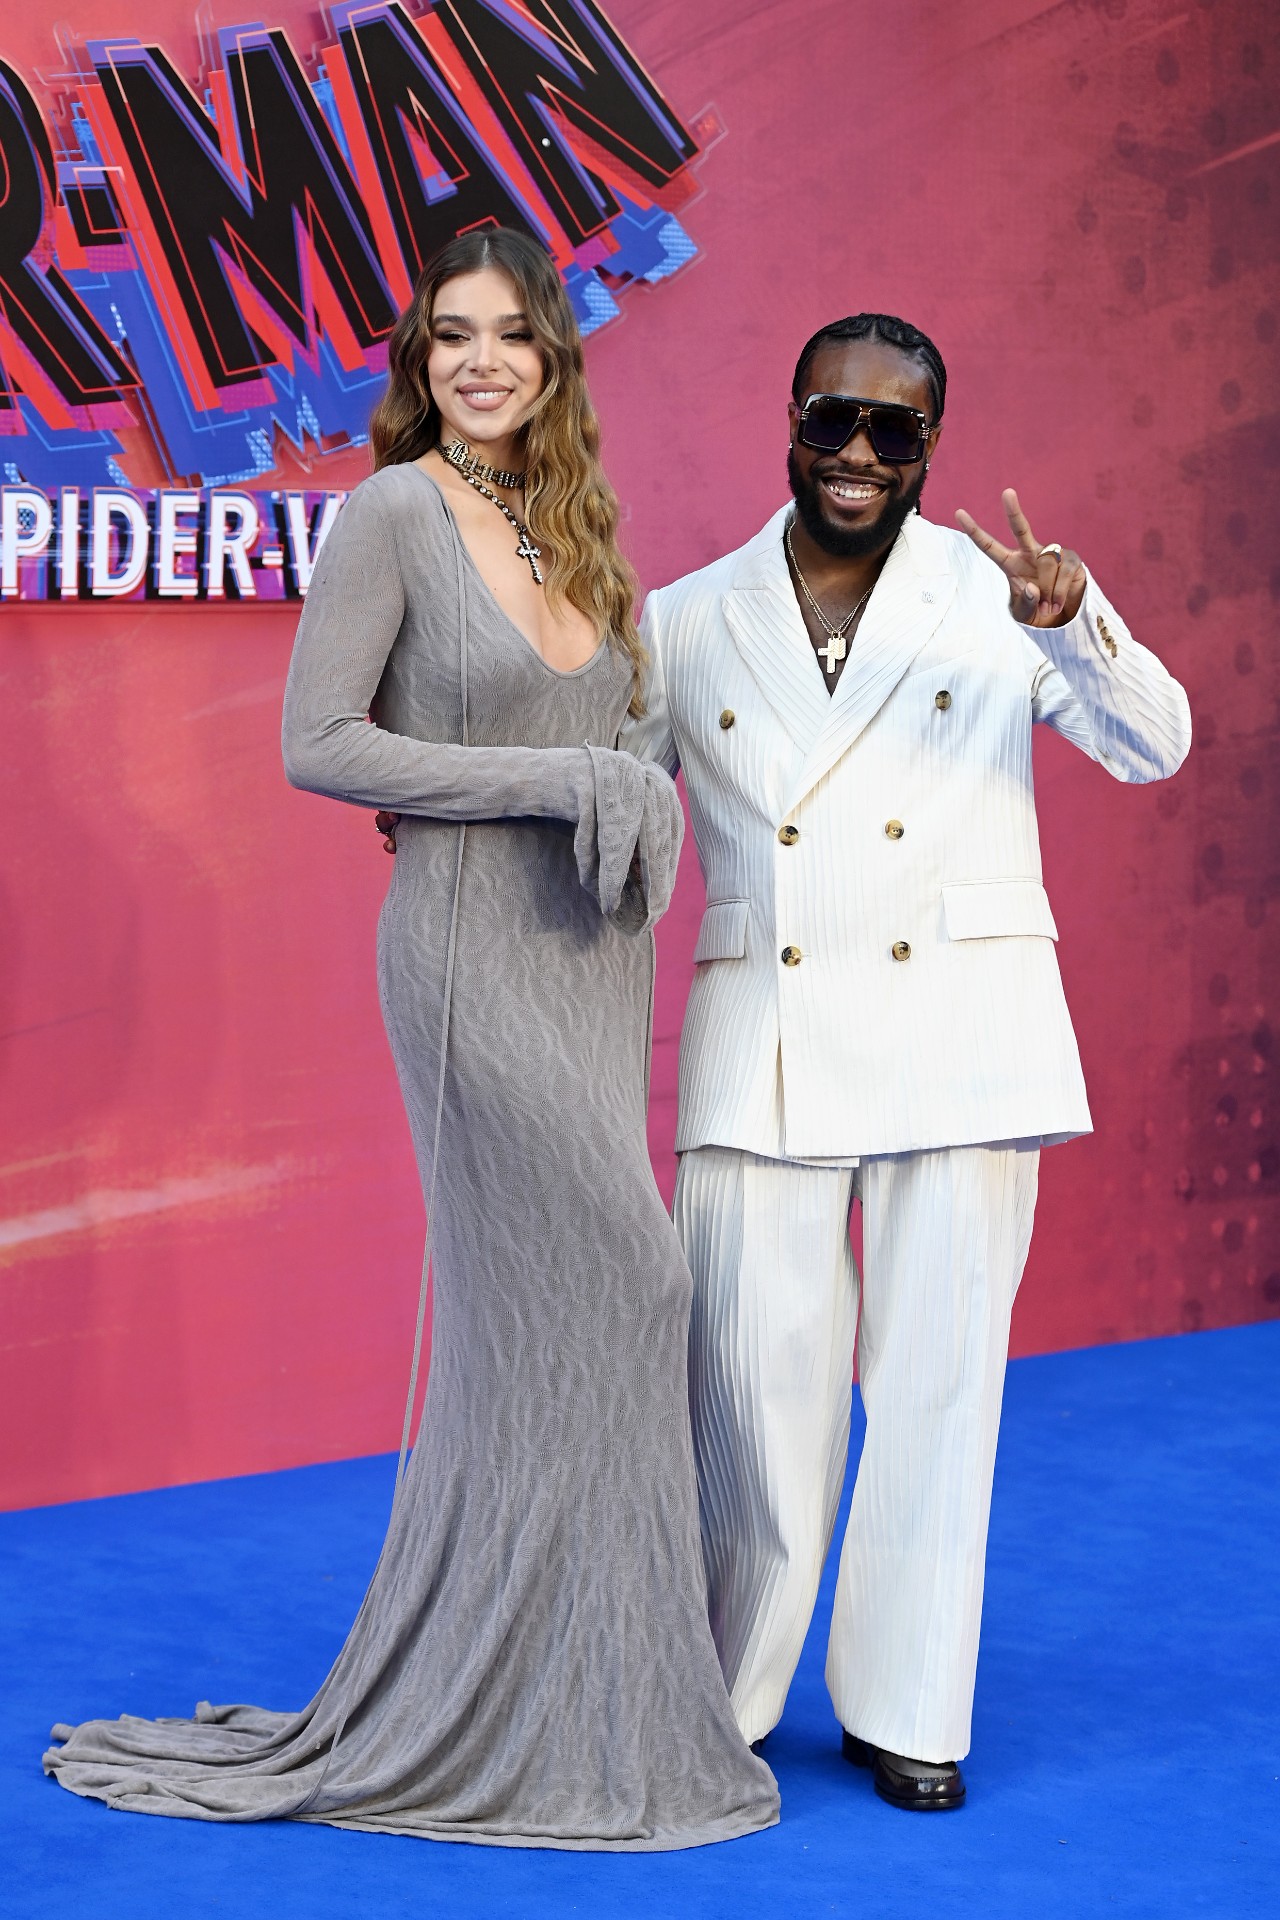 Spider-Man: Across the Spider-Verse': red carpet looks